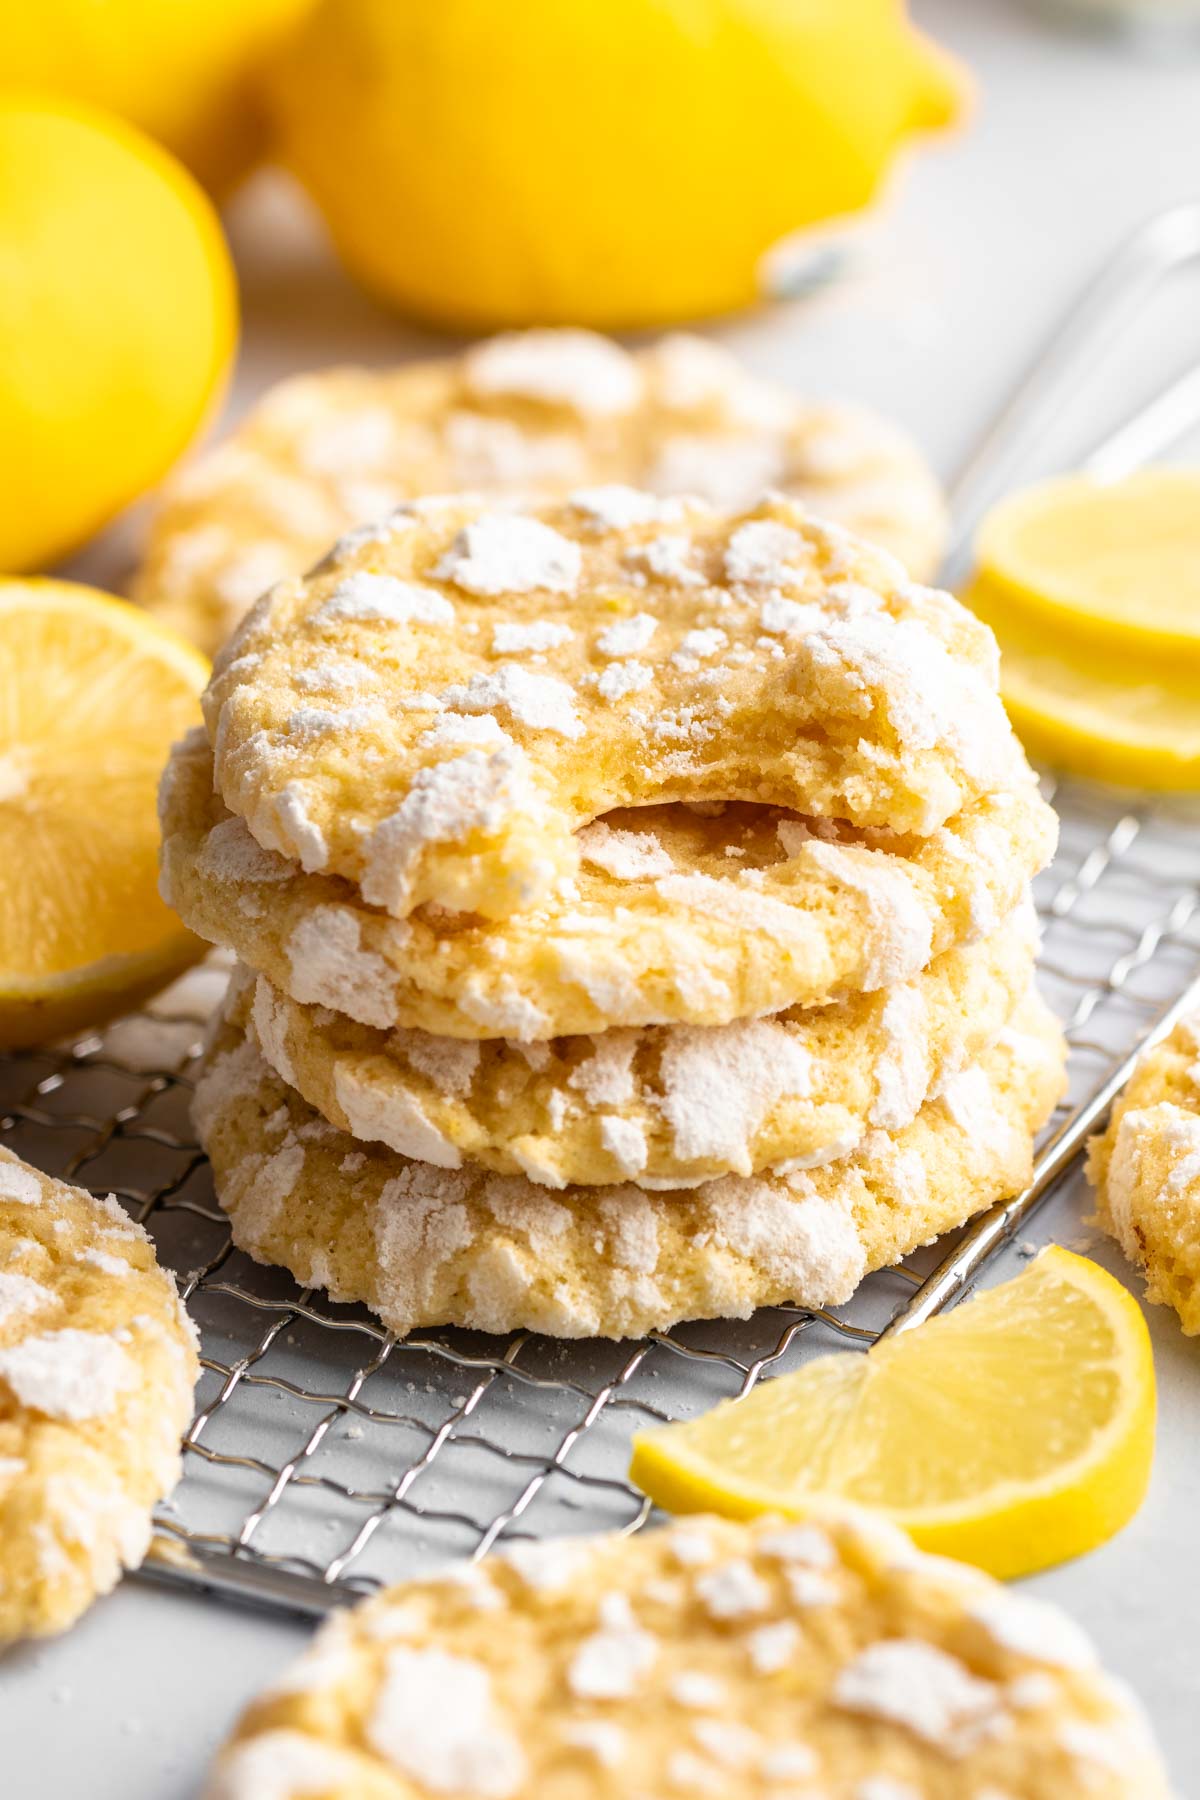 Stack of lemon cookies with the top one missing a bite.